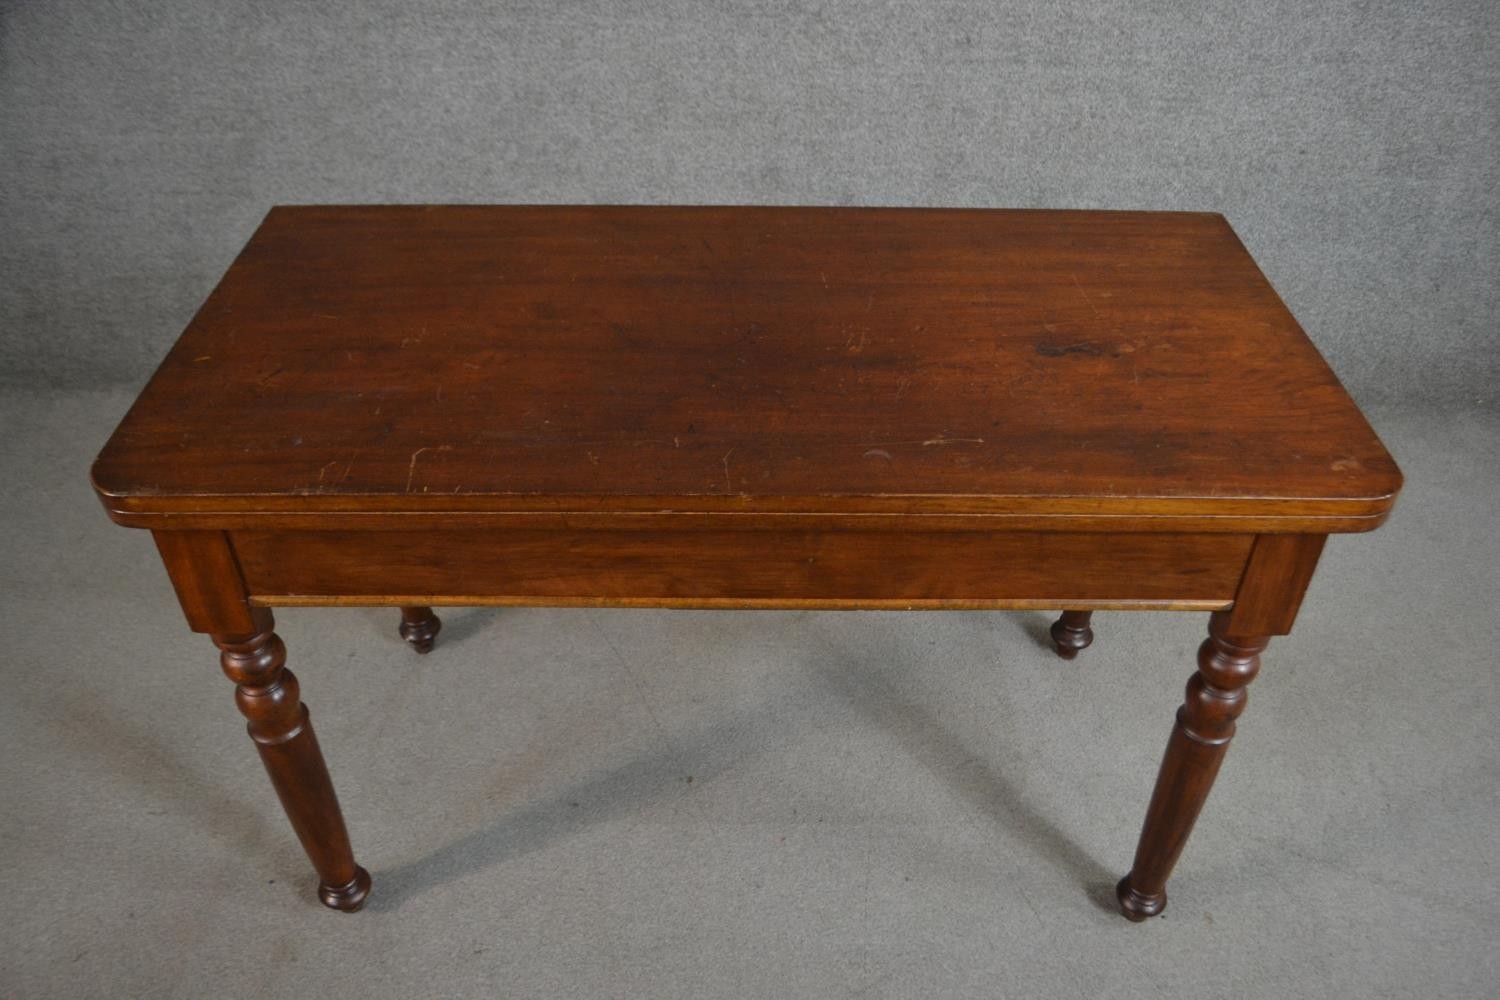 A Victorian walnut tea table of rectangular form with a fold over top on turned legs. H.70 W.116 D. - Image 2 of 6